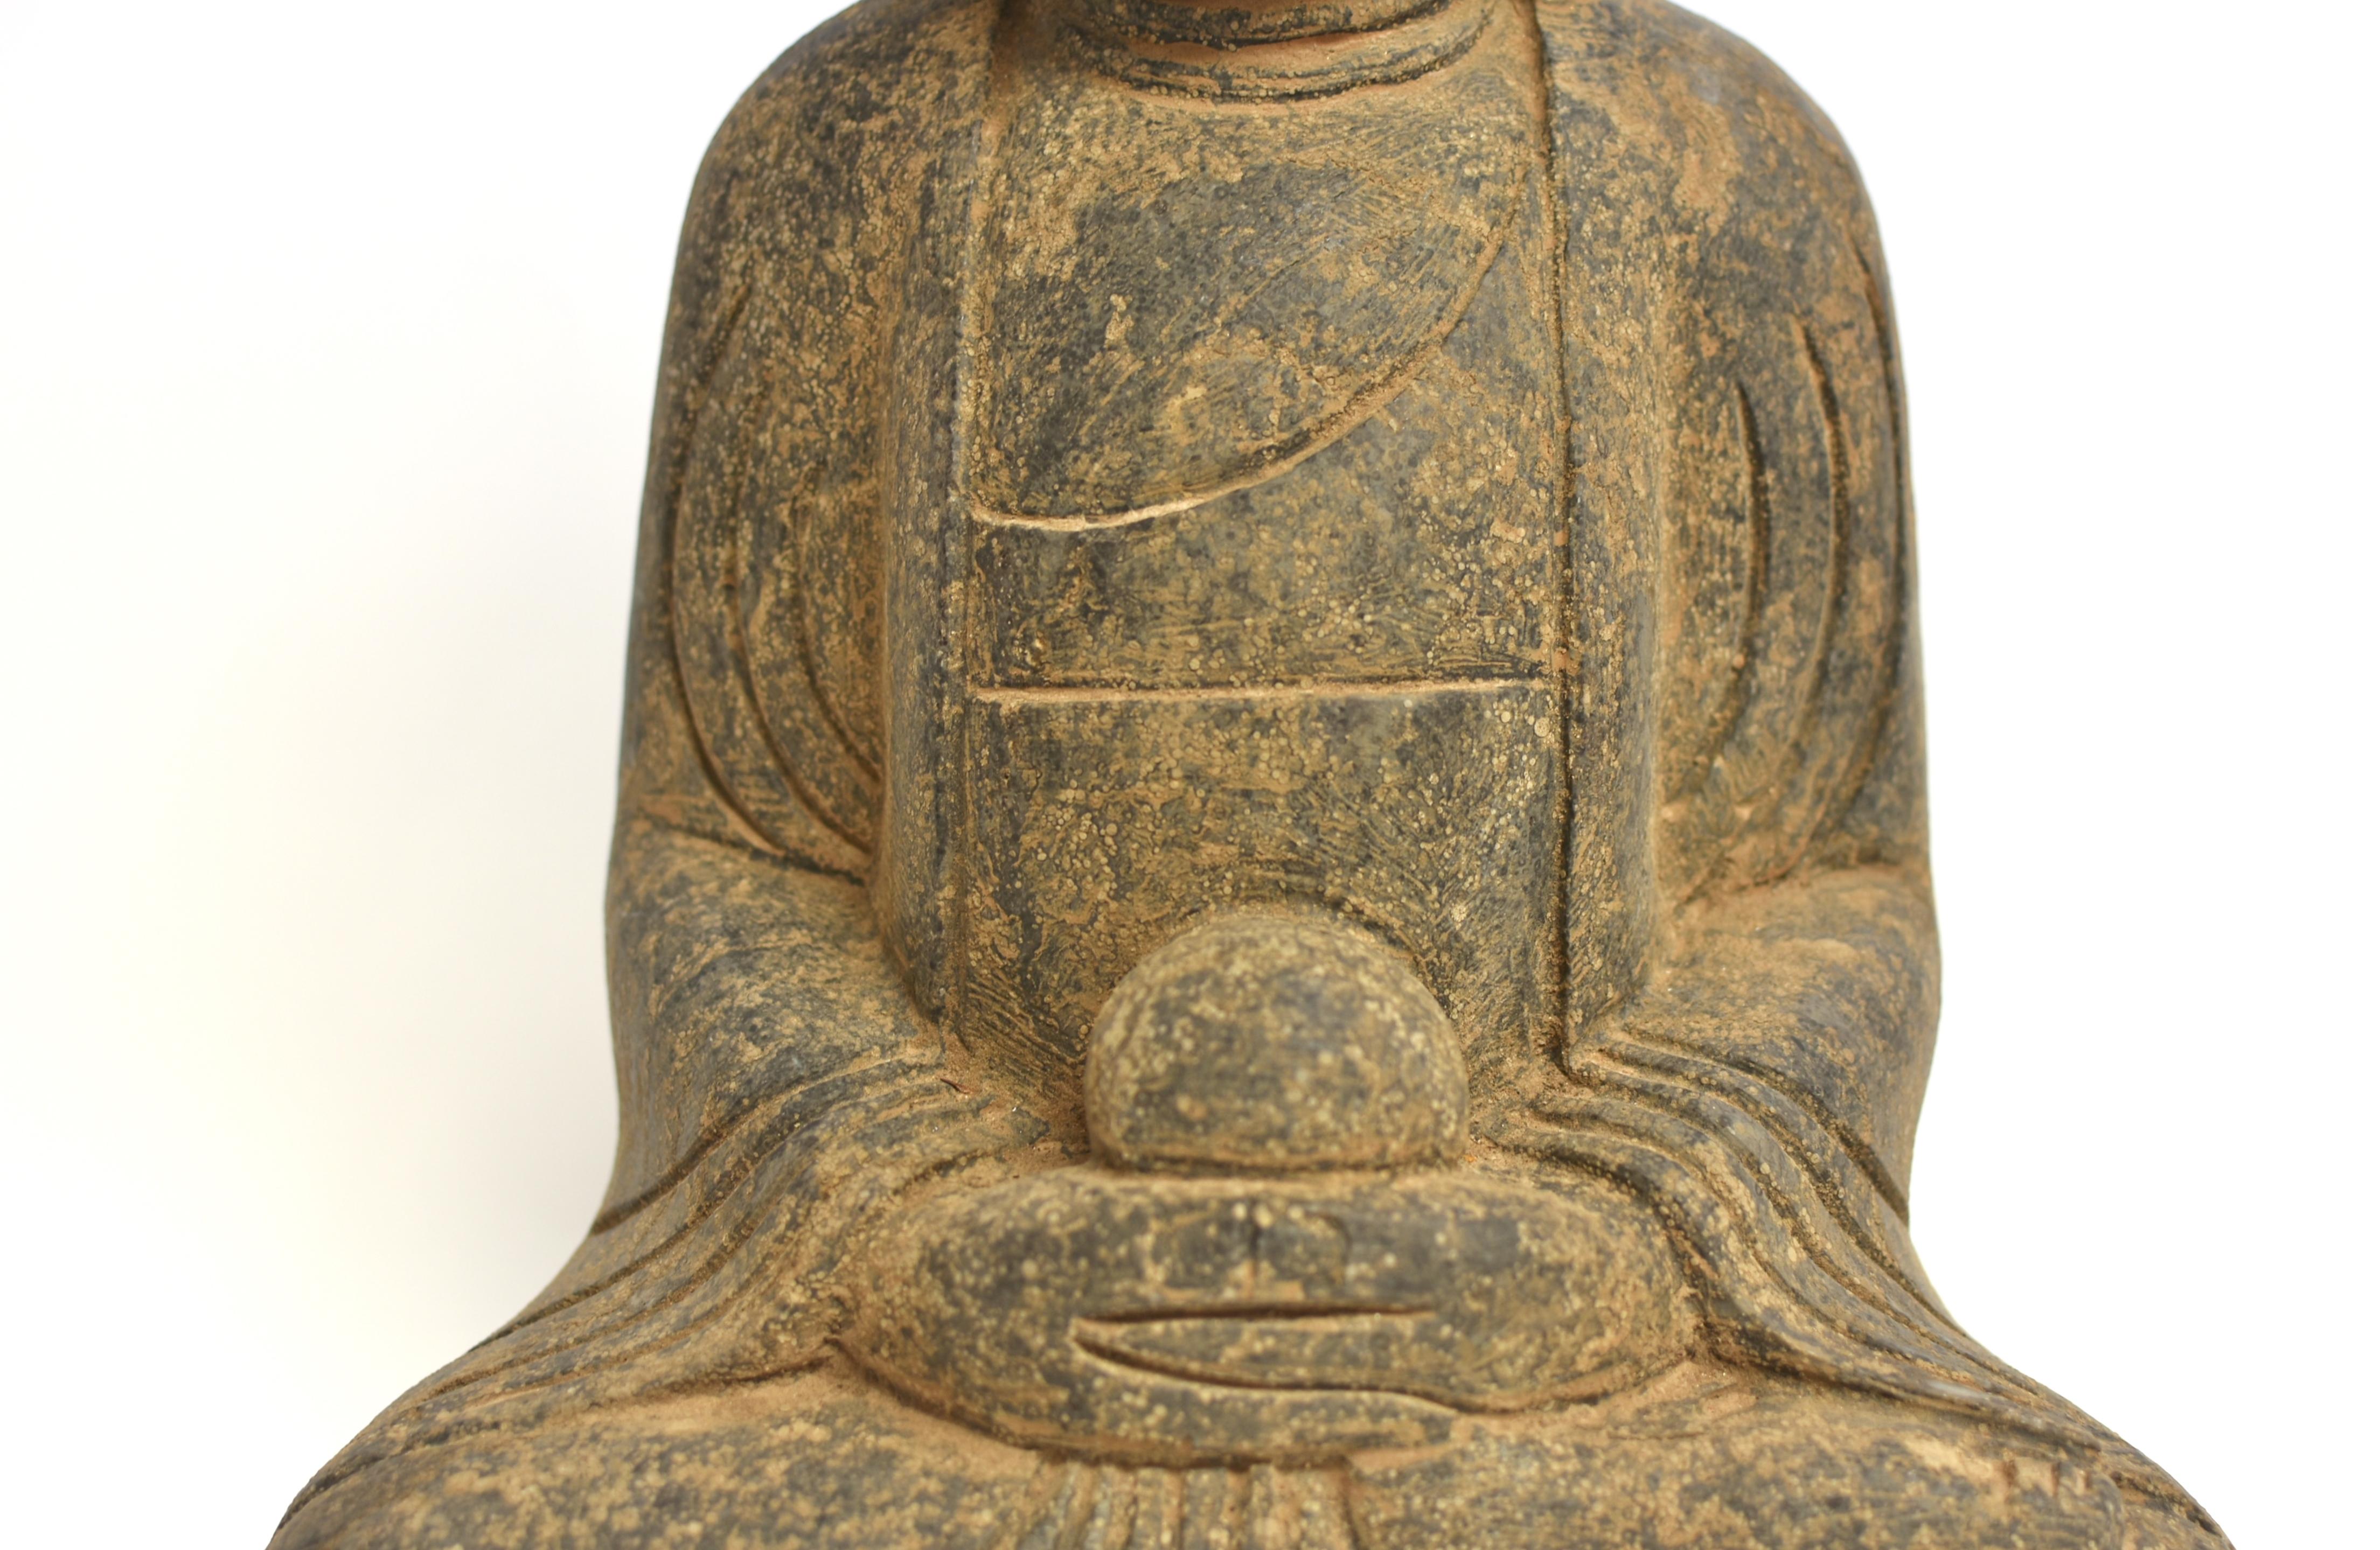 A beautiful solid stone statue of Buddha Amitabha. The face broad in Tang dynasty style, with downcast eyes and long earlobes, neatly coiled hair mounted on top of his head. Seated dhyana asana with hands in dhyana mudra, wearing a fluid robe folded